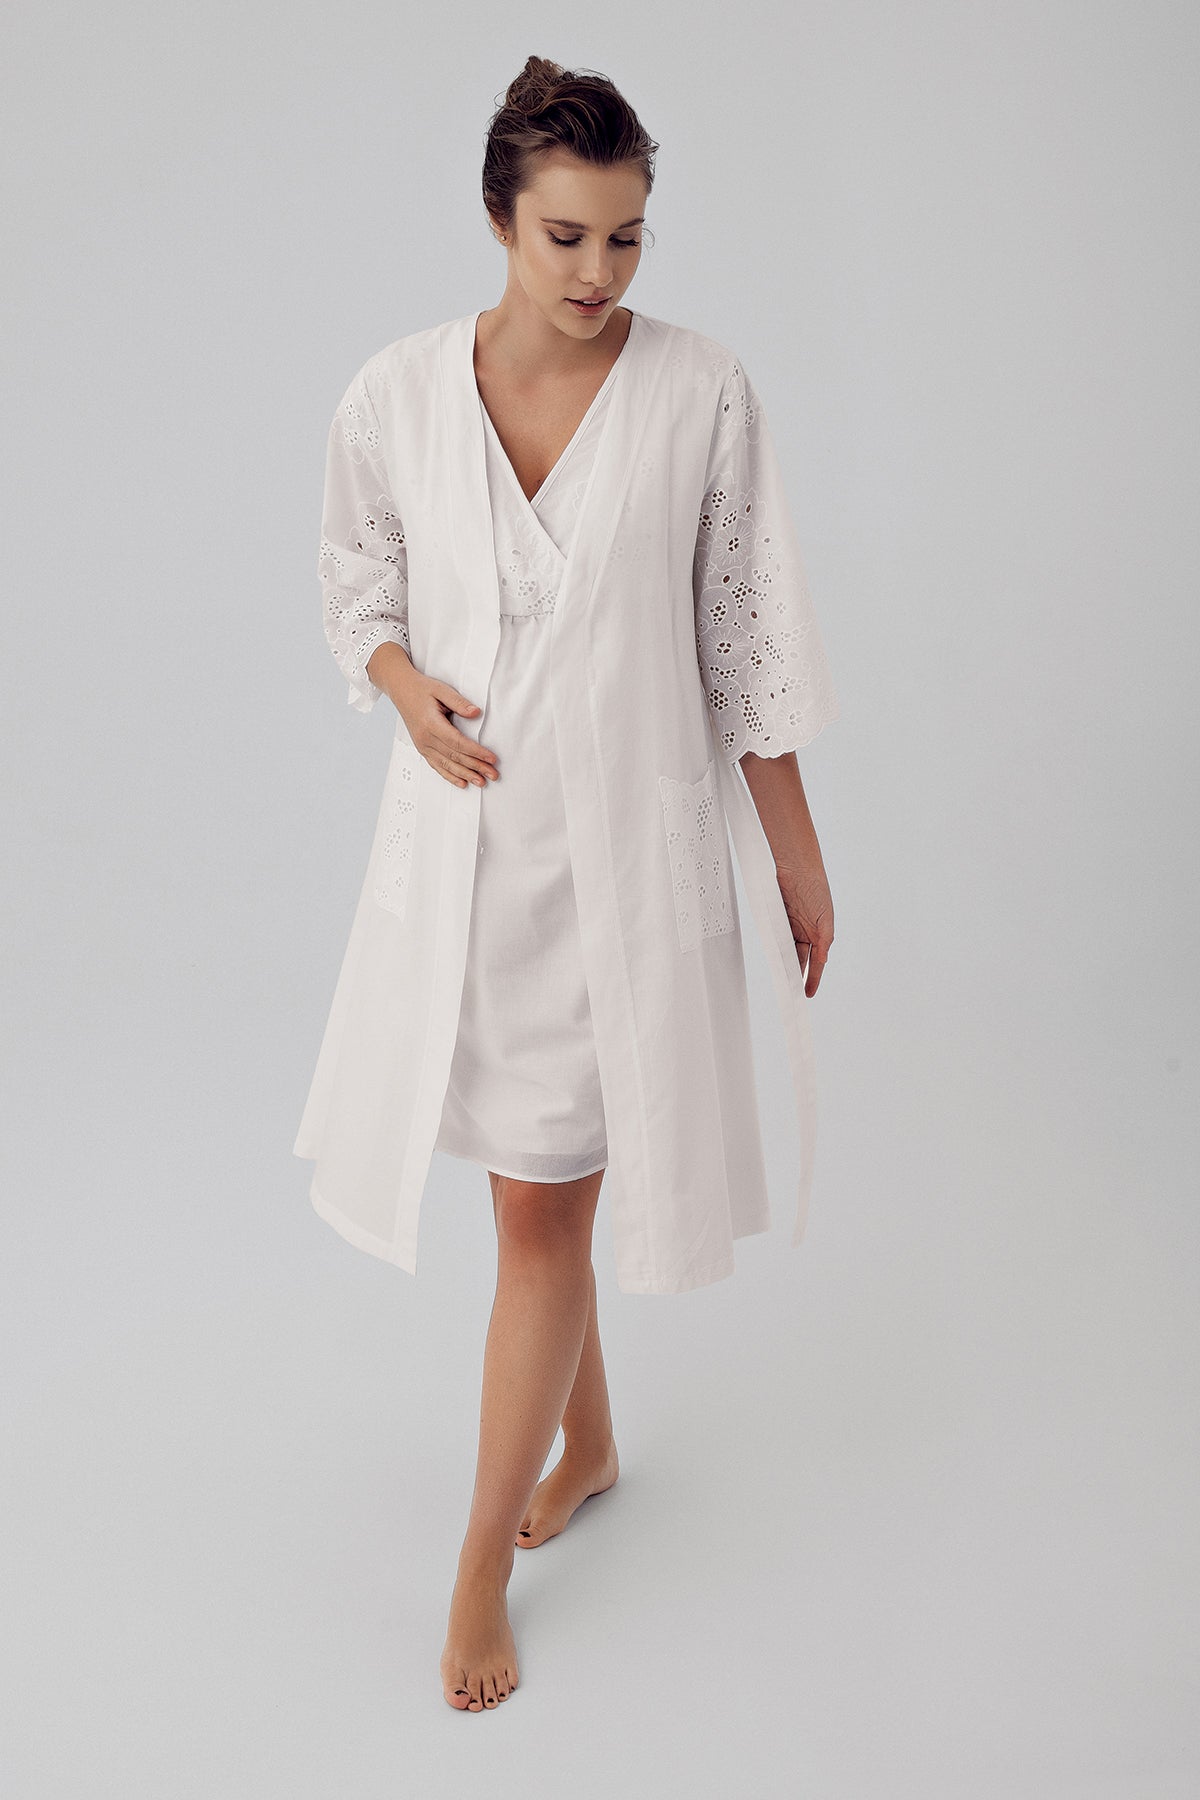 Double Breasted Maternity & Nursing Nightgown With Woven Robe Ecru - 16413